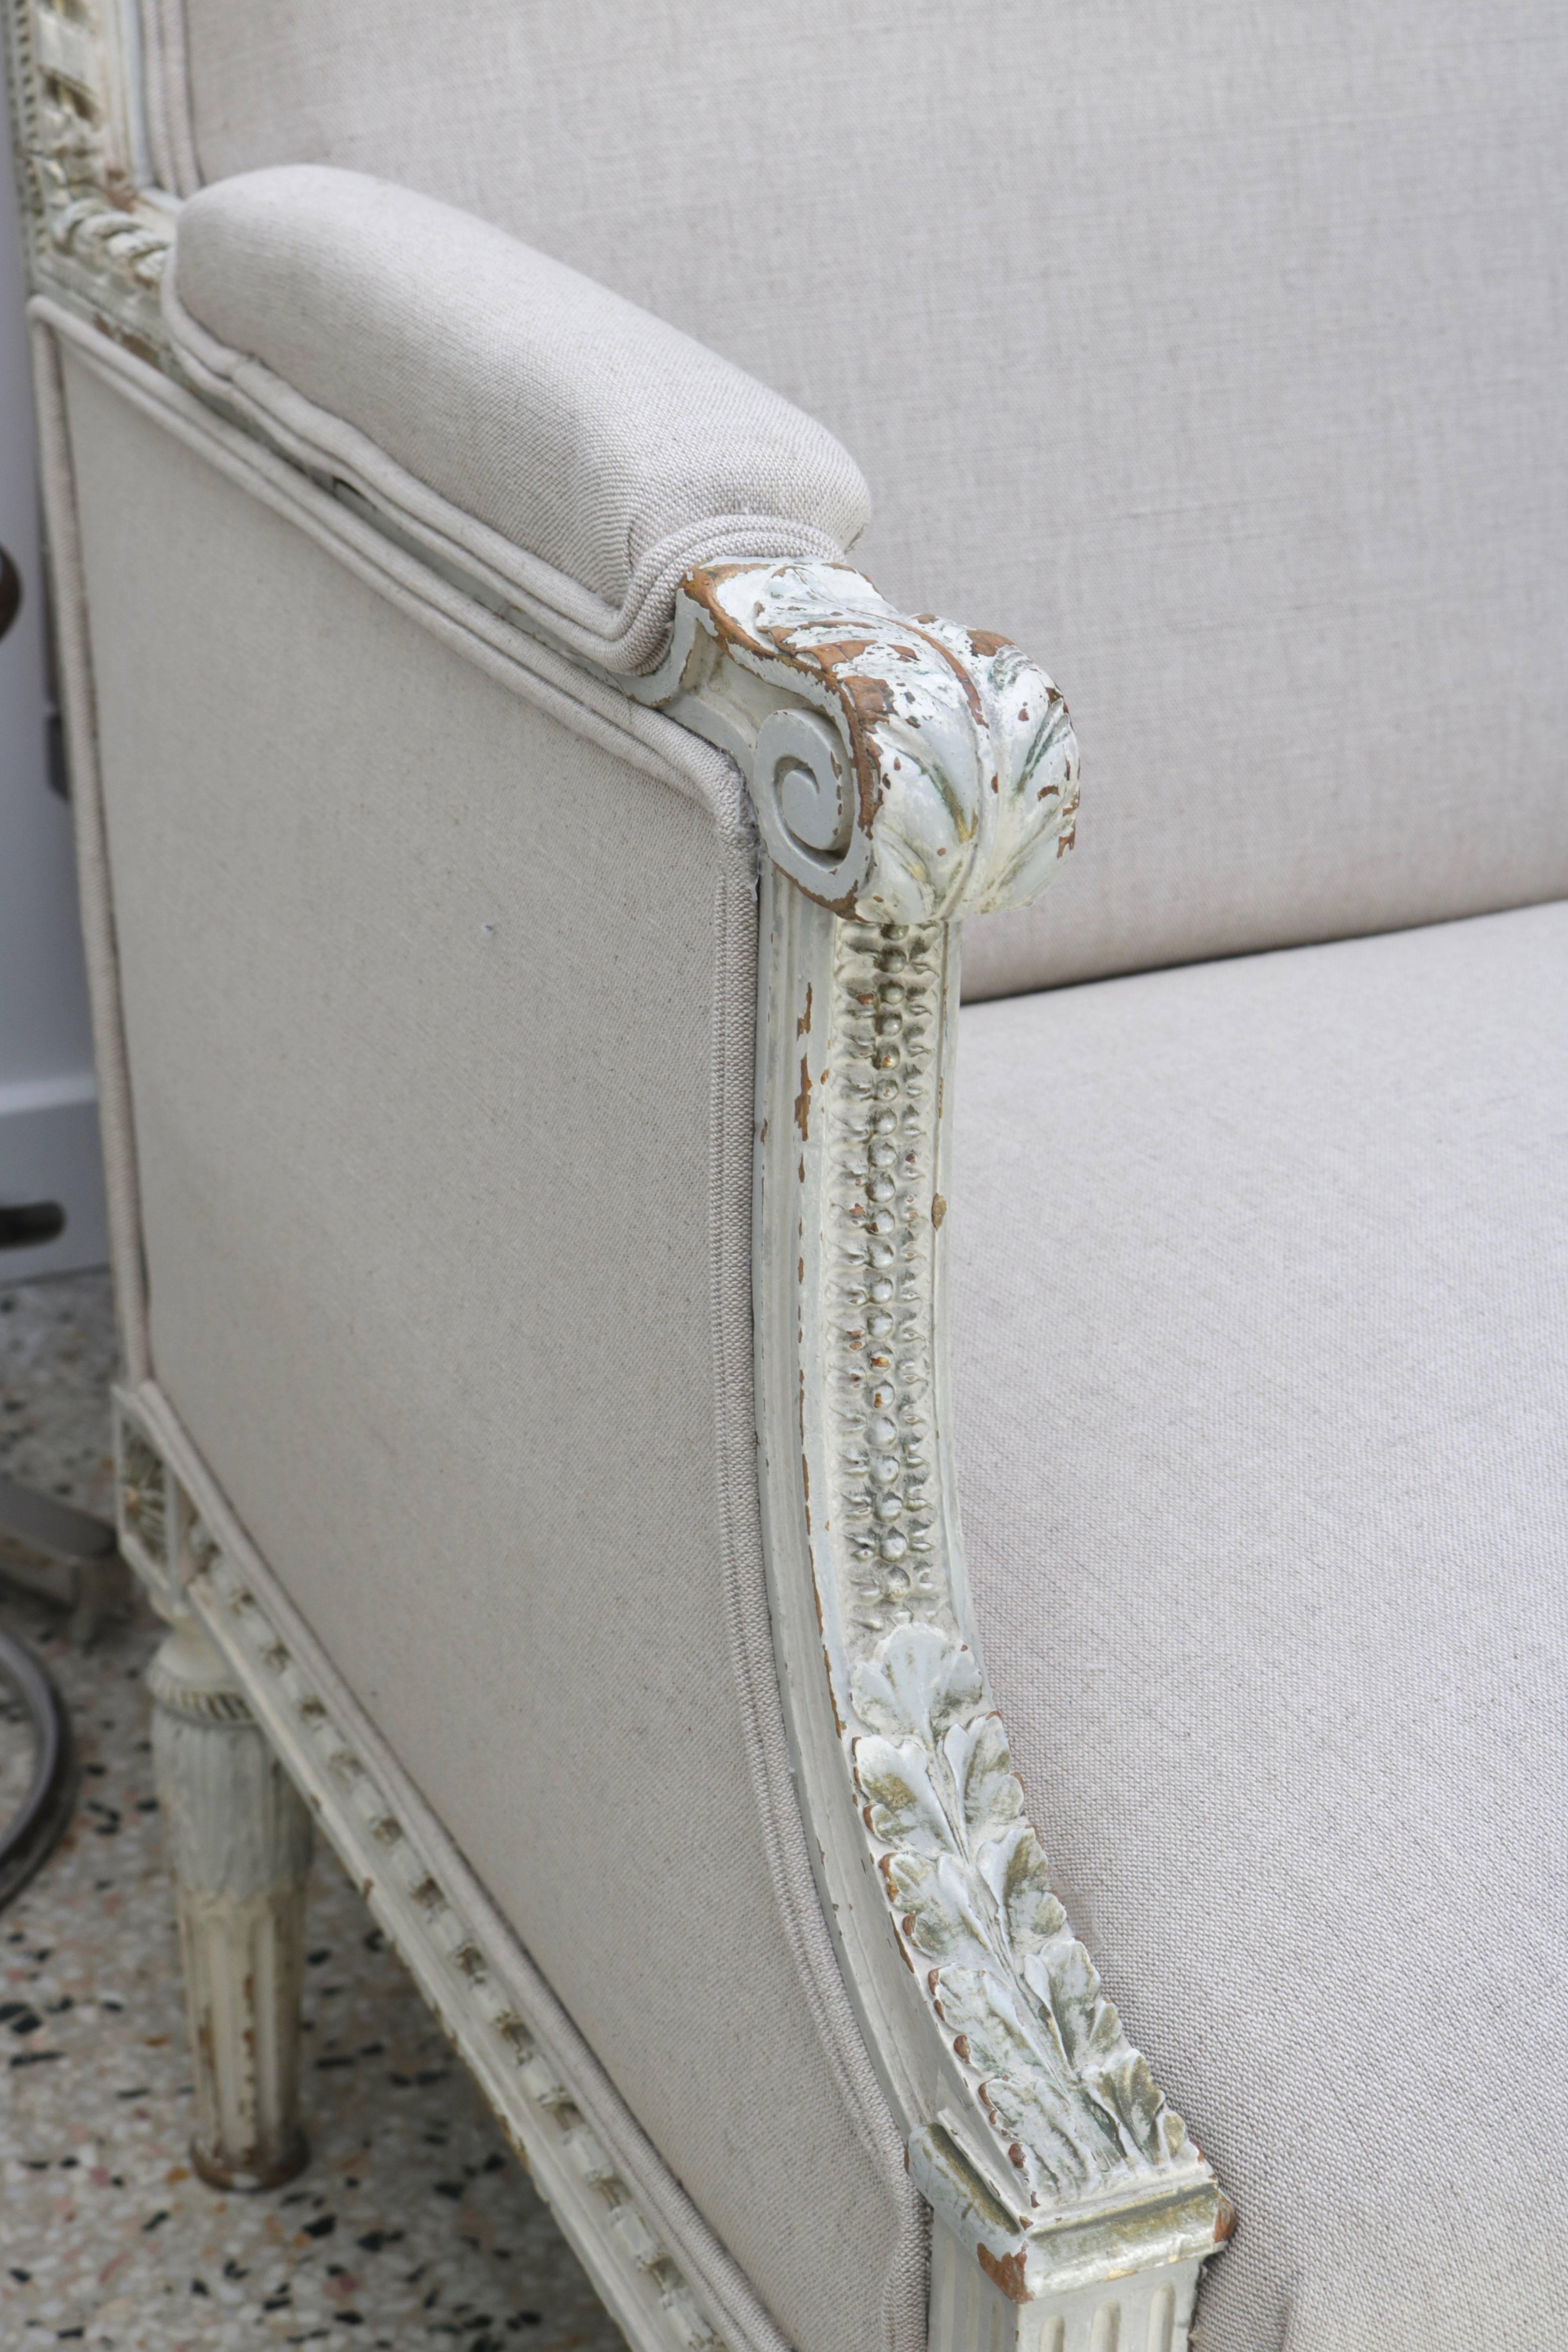 This stylish Louis XVI style settee was recently purchased in London and has been professionally reupholstered in a linen-like, woven beige/tan coloration fabric which works beautifully with the off-white and bronze/green painted frame.

Note:  The